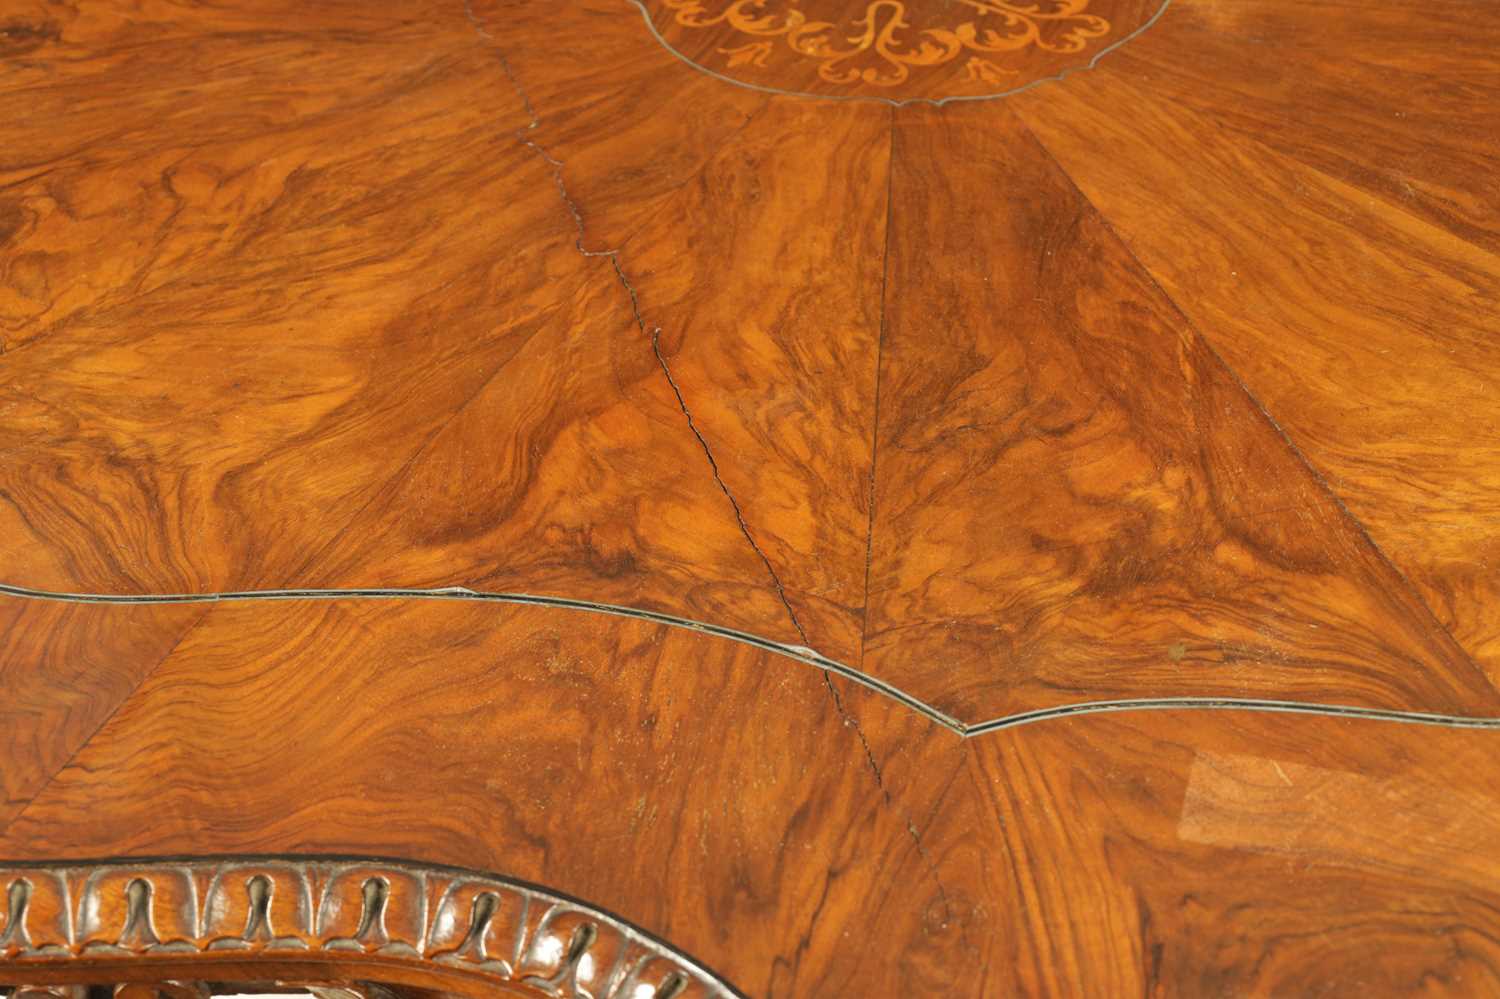 A FINE EARLY 19TH CENTURY CONTINENTAL FIGURED WALNUT CARVED CENTRE TABLE - Image 6 of 11